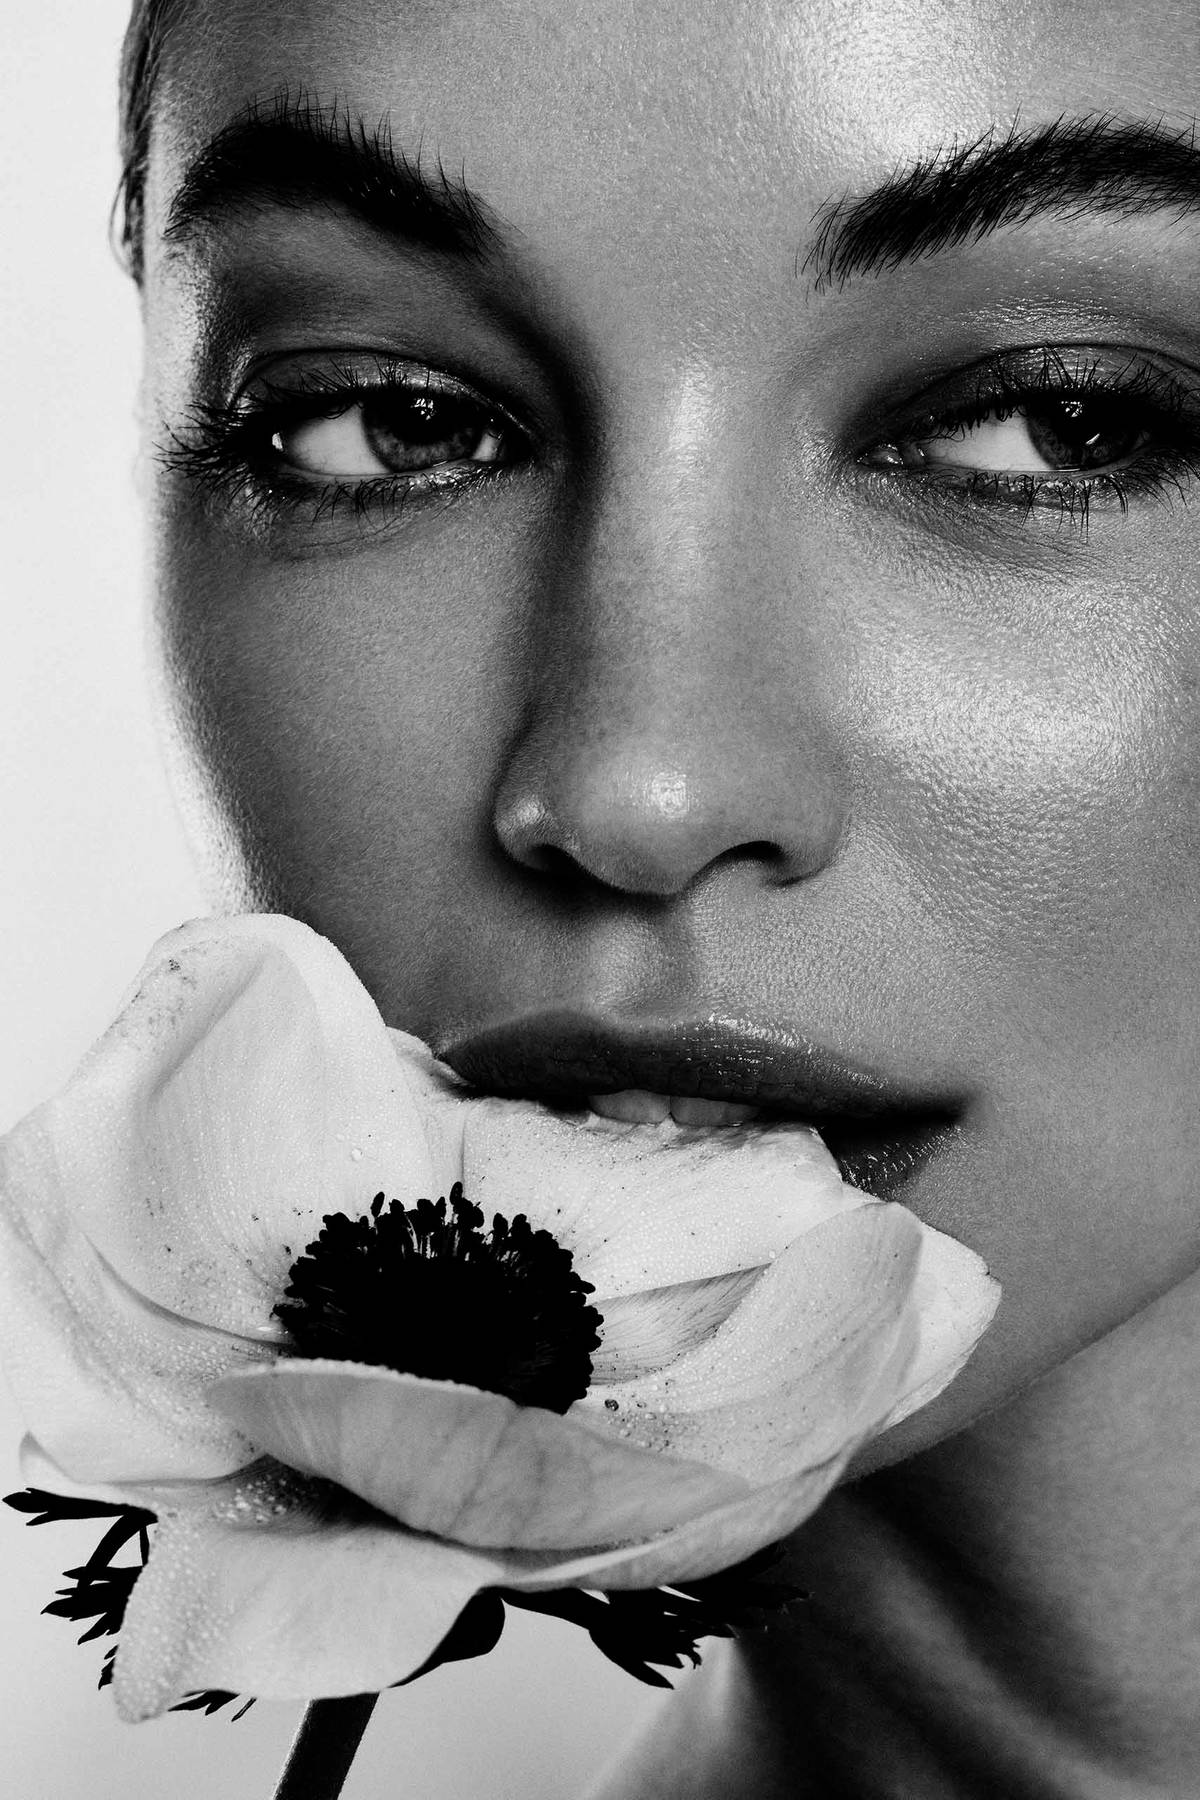 FLOWER_face_black_and_white_eating_eyebrows_sexy_beauty_photography_losAngeles__DoritThies_1013 copy 2.jpg